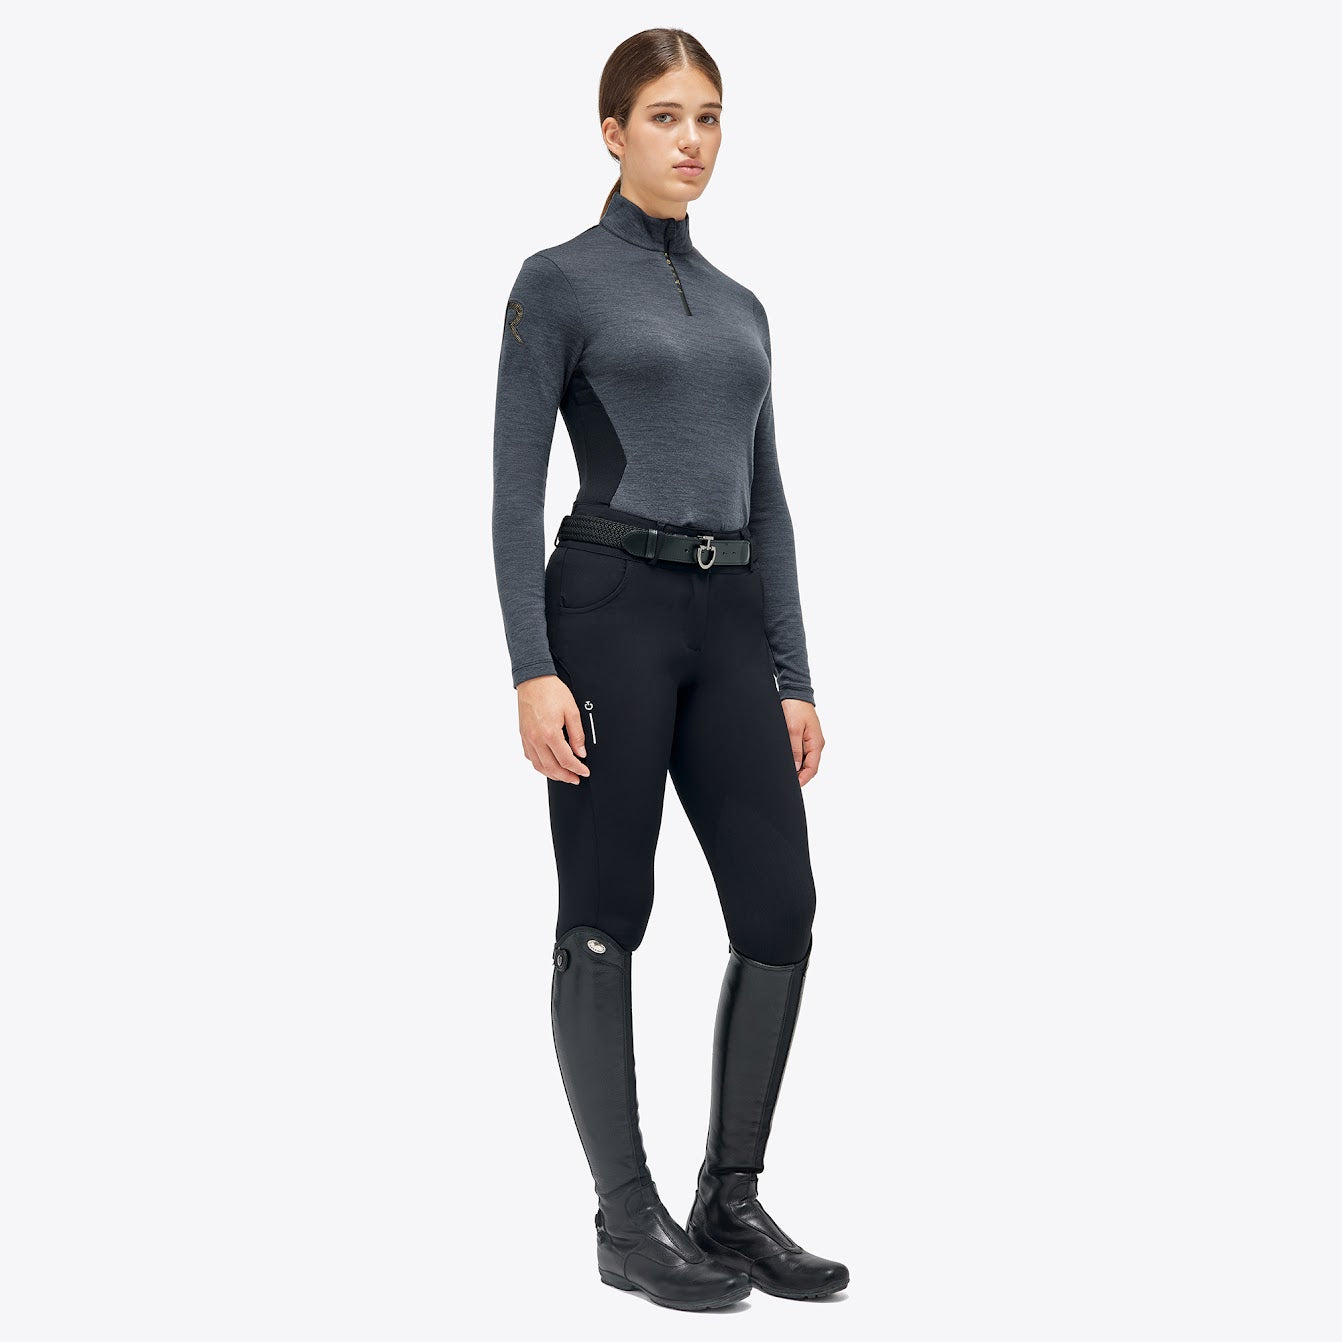 The Cavalleria Toscana Grey and black Revolution Premier Tech Wool training top. The slimming silhouette is feminine yet sporty. Black fine tech knit back gives maximum freedom of movement. This CT training top is perfect for the shows, training or on the yard. 